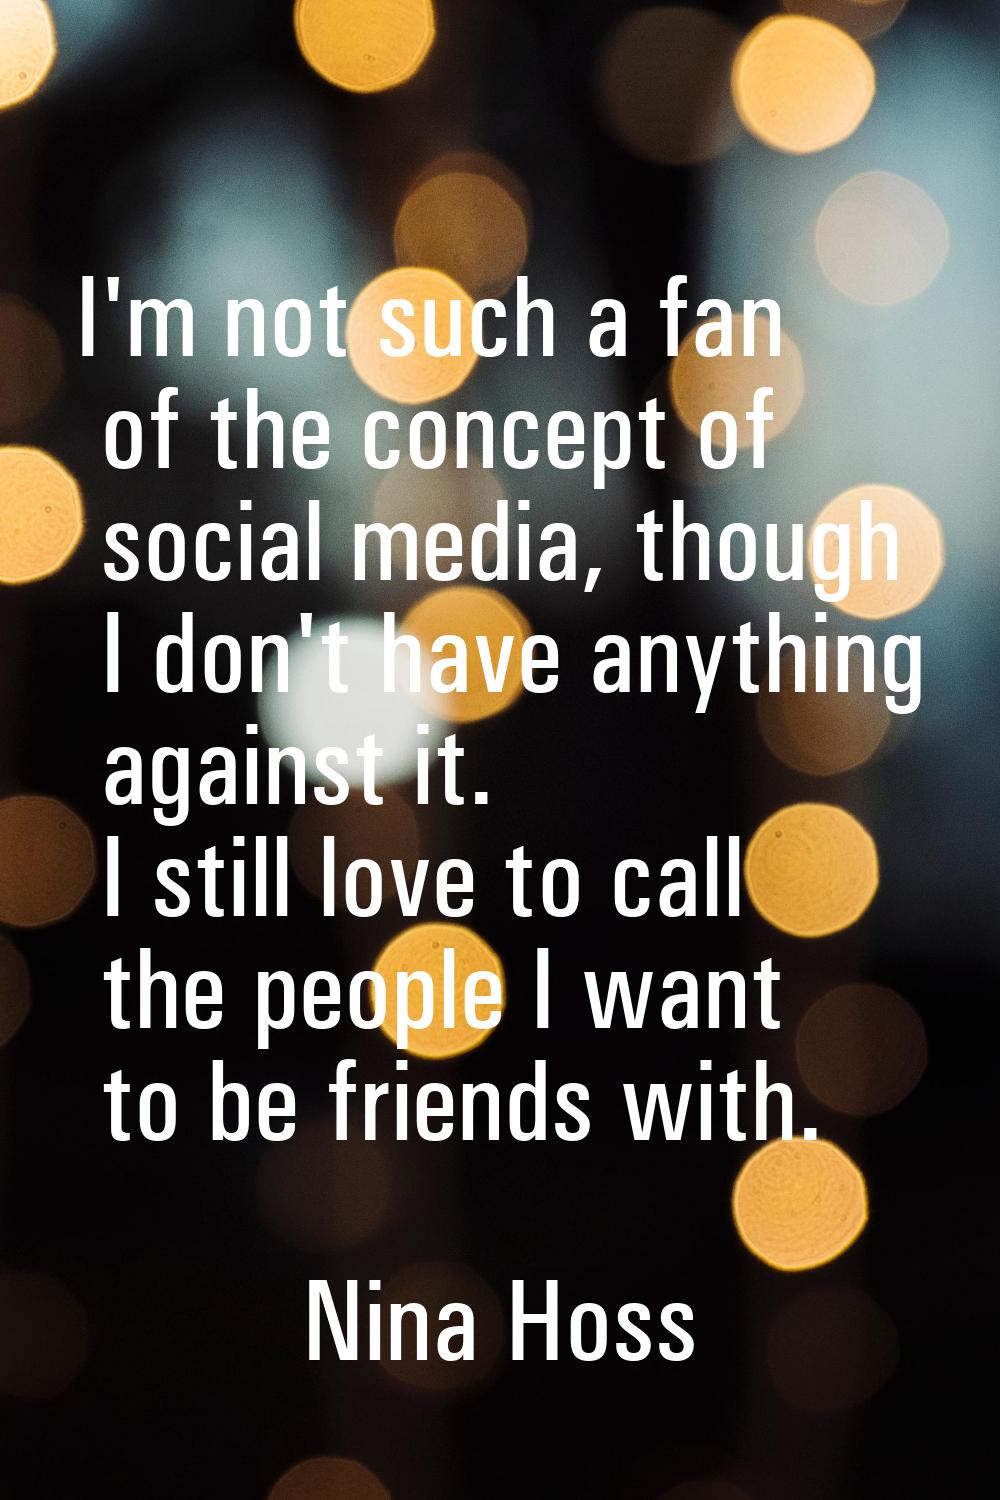 I'm not such a fan of the concept of social media, though I don't have anything against it. I still